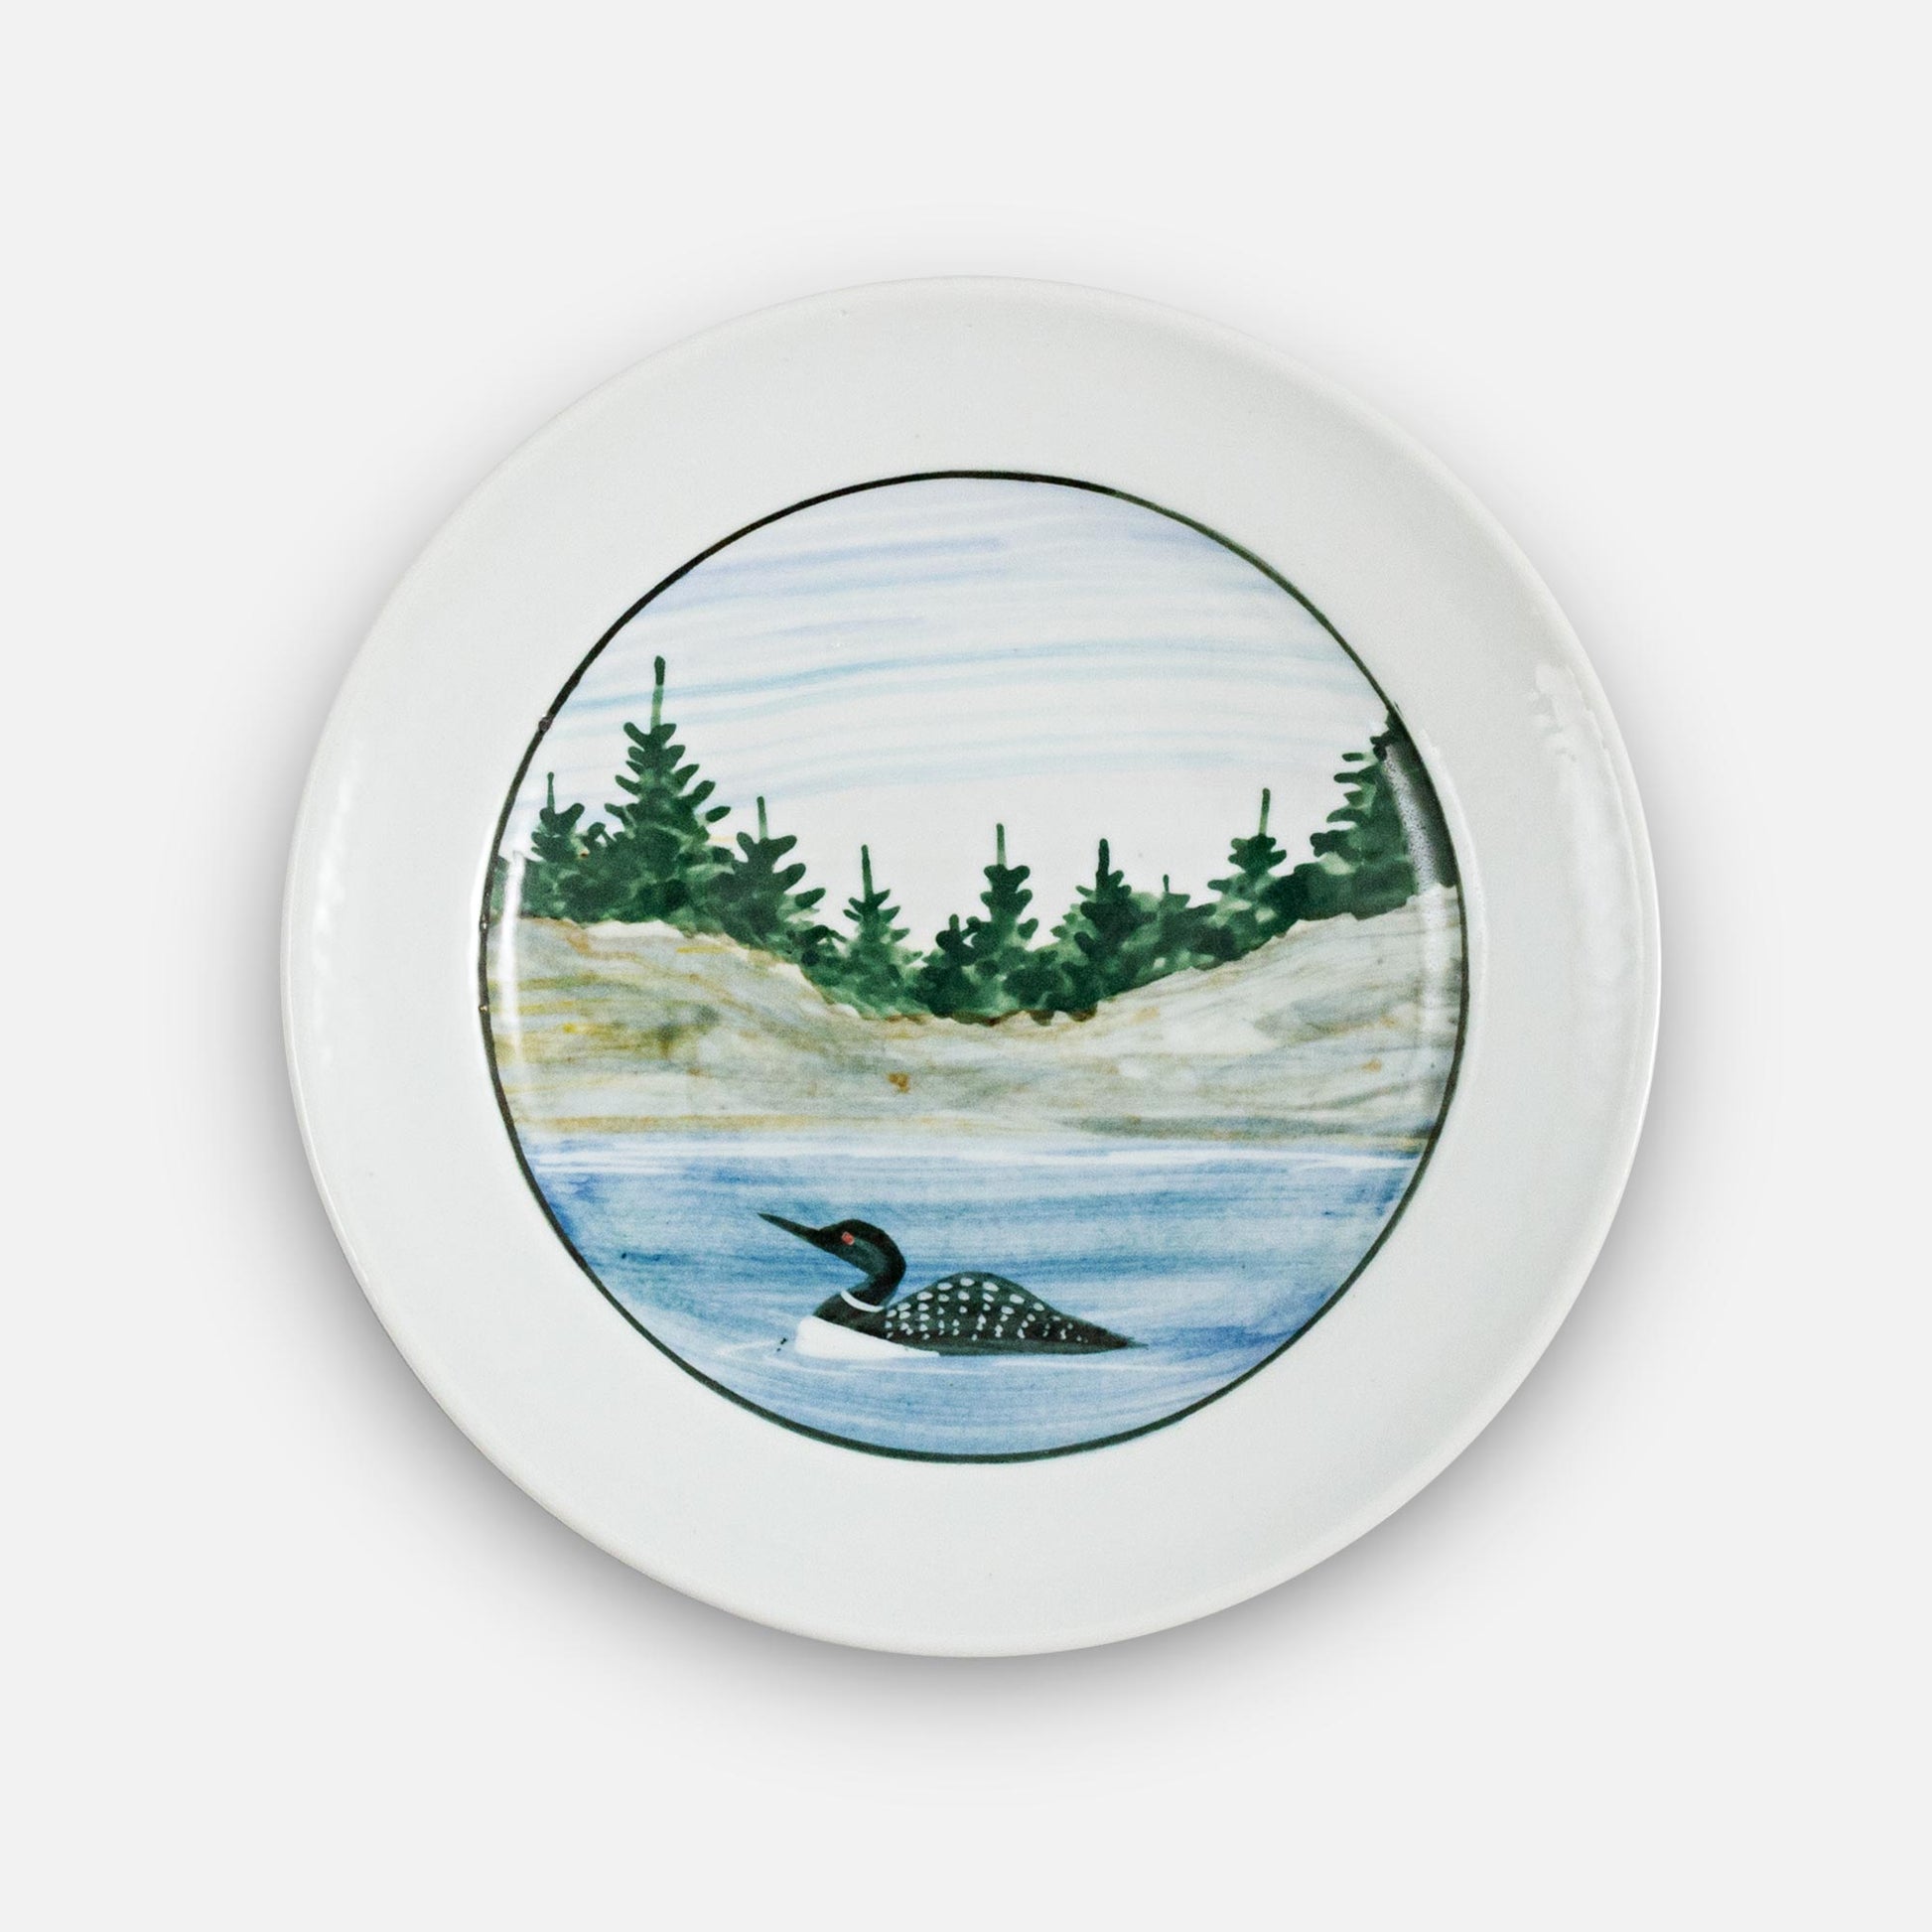 Handmade Pottery Rimless Dinner Plate made by Georgetown Pottery in Maine in Loon pattern